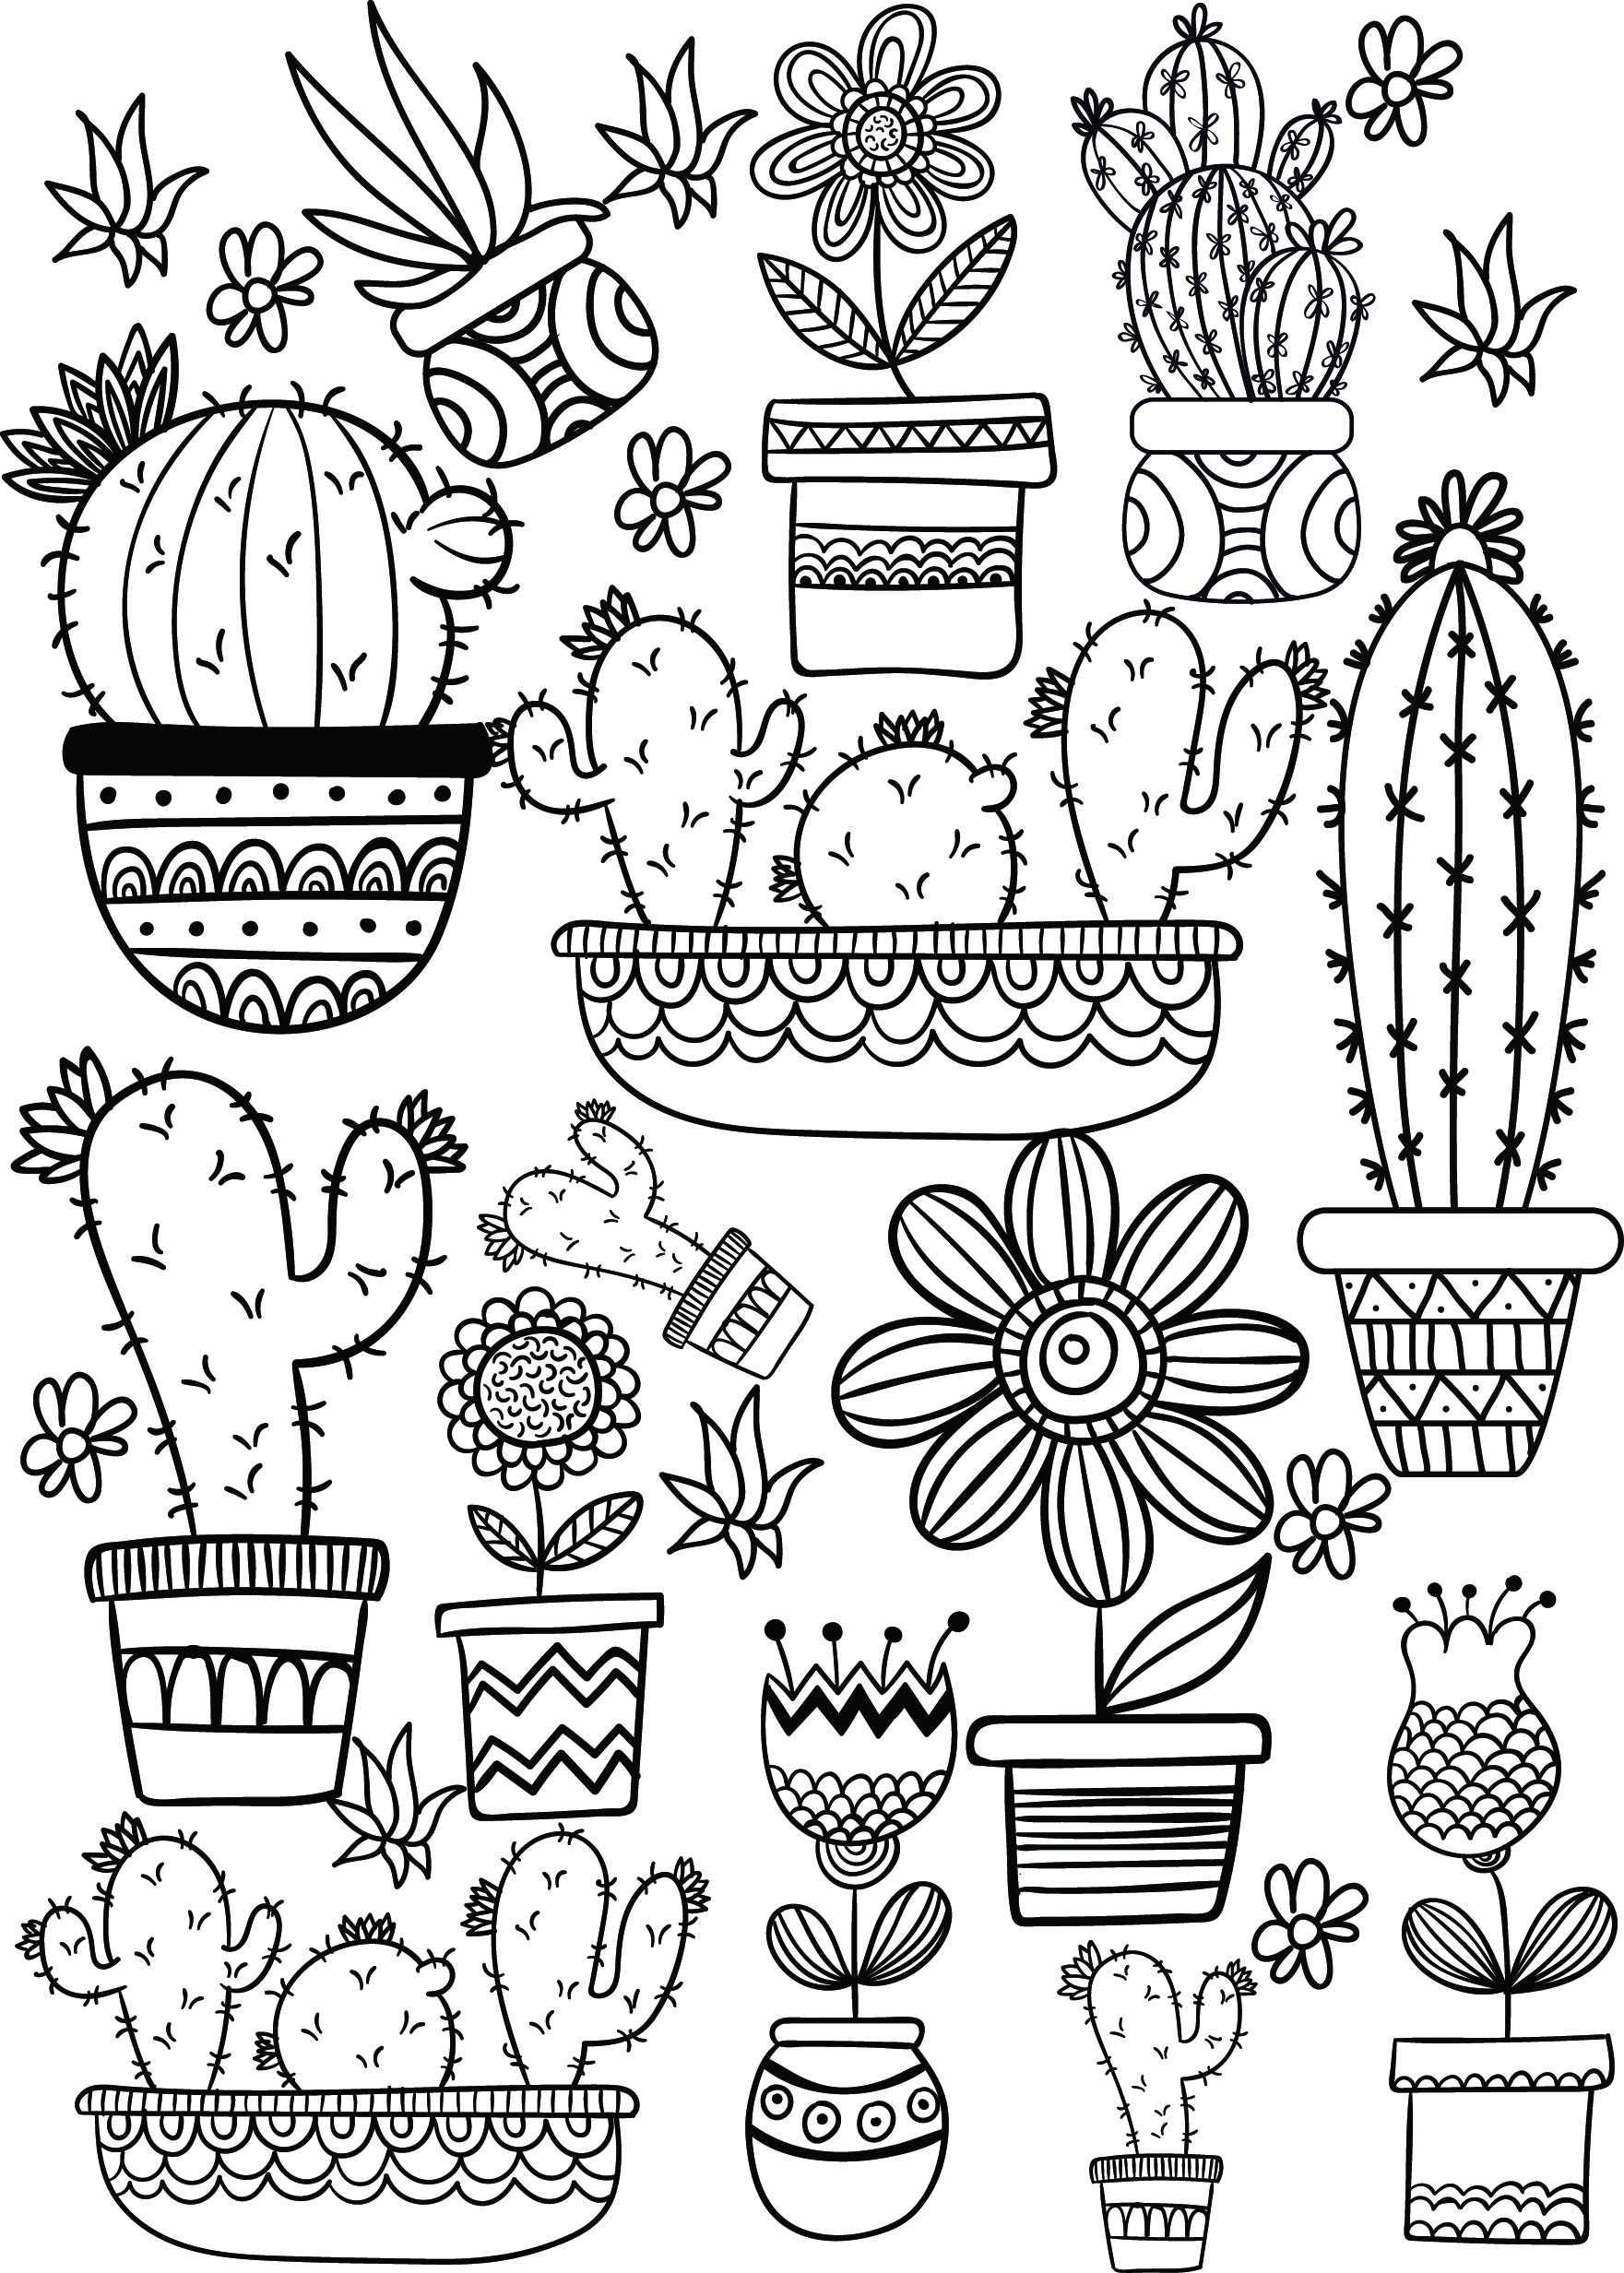 Free Printable Cactus Coloring Pages
 Cactus and Succulent Printable Adult Coloring Pages